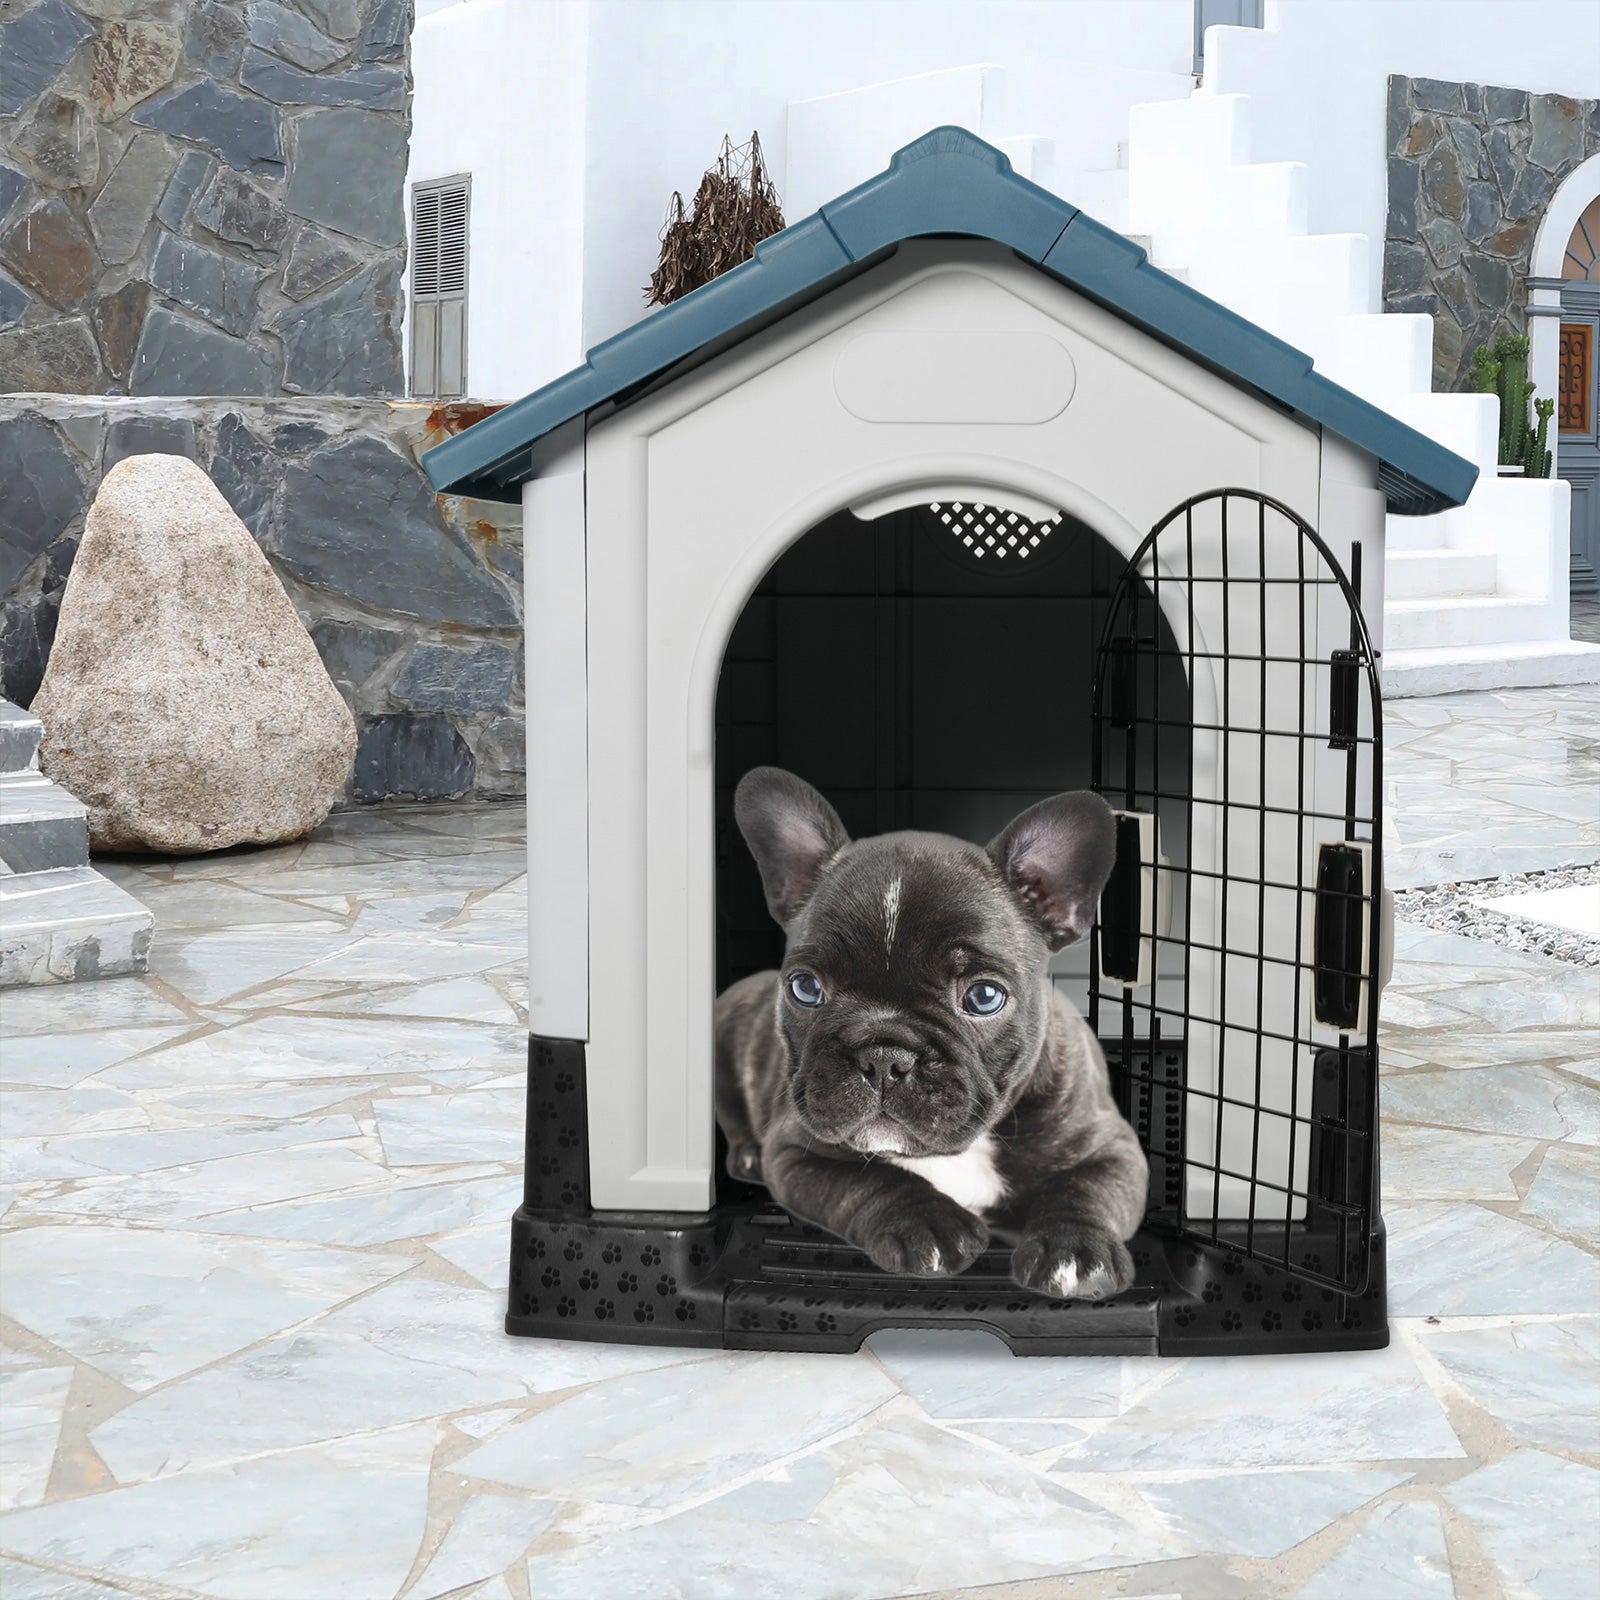 Outdoor Small Dog House Plastic Waterproof Kennel with Air Vents, 23.6"L x 18.9"W x 25.6"H, Blue Roof